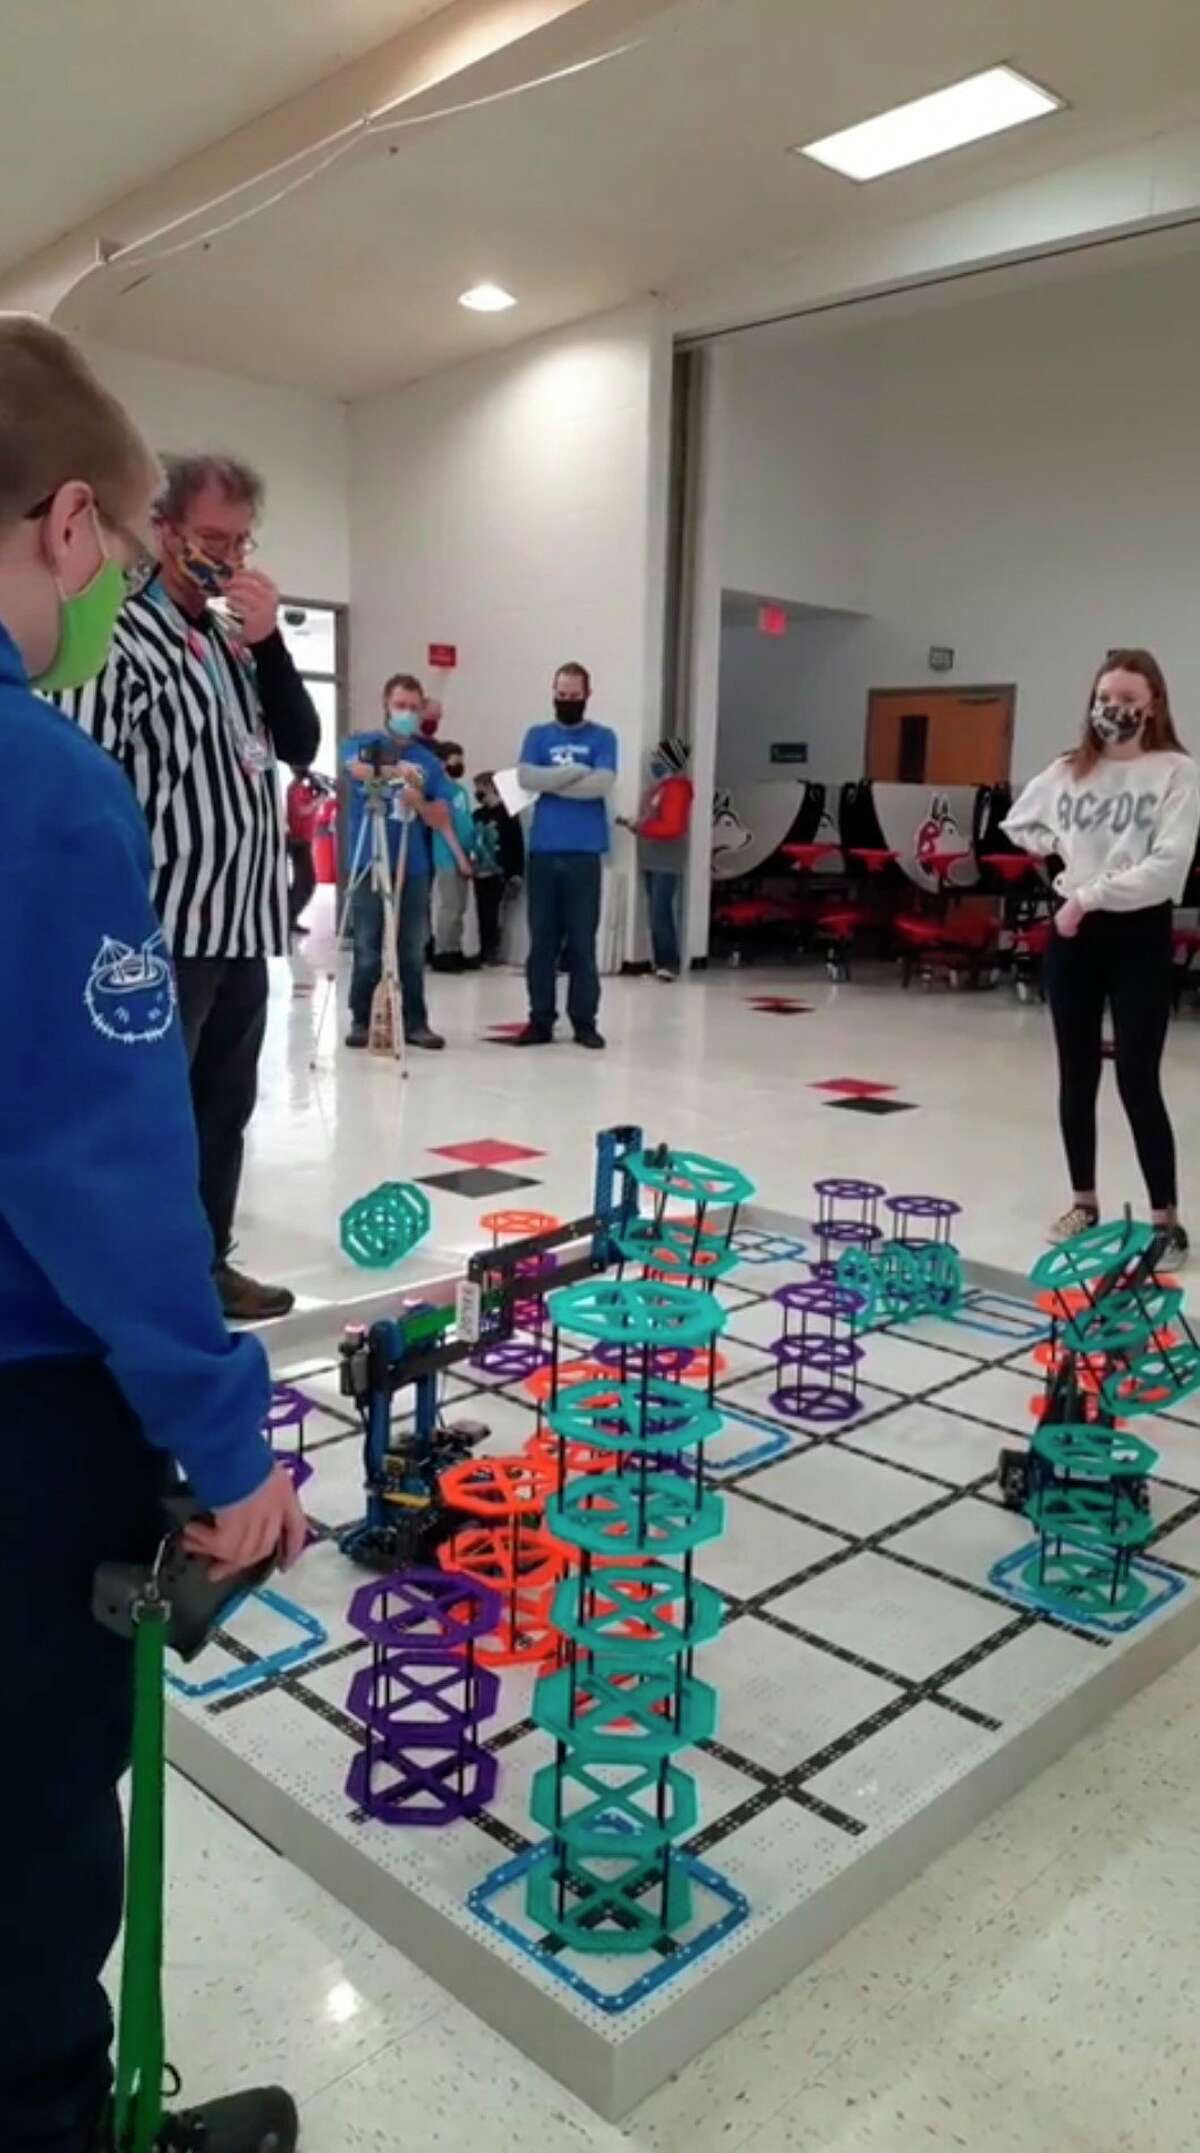 Competitors in the VEX IQ event at Benzie Central used their robots to push risers into goals and stack more risers on top of them for extra points. (Courtesy Photo)